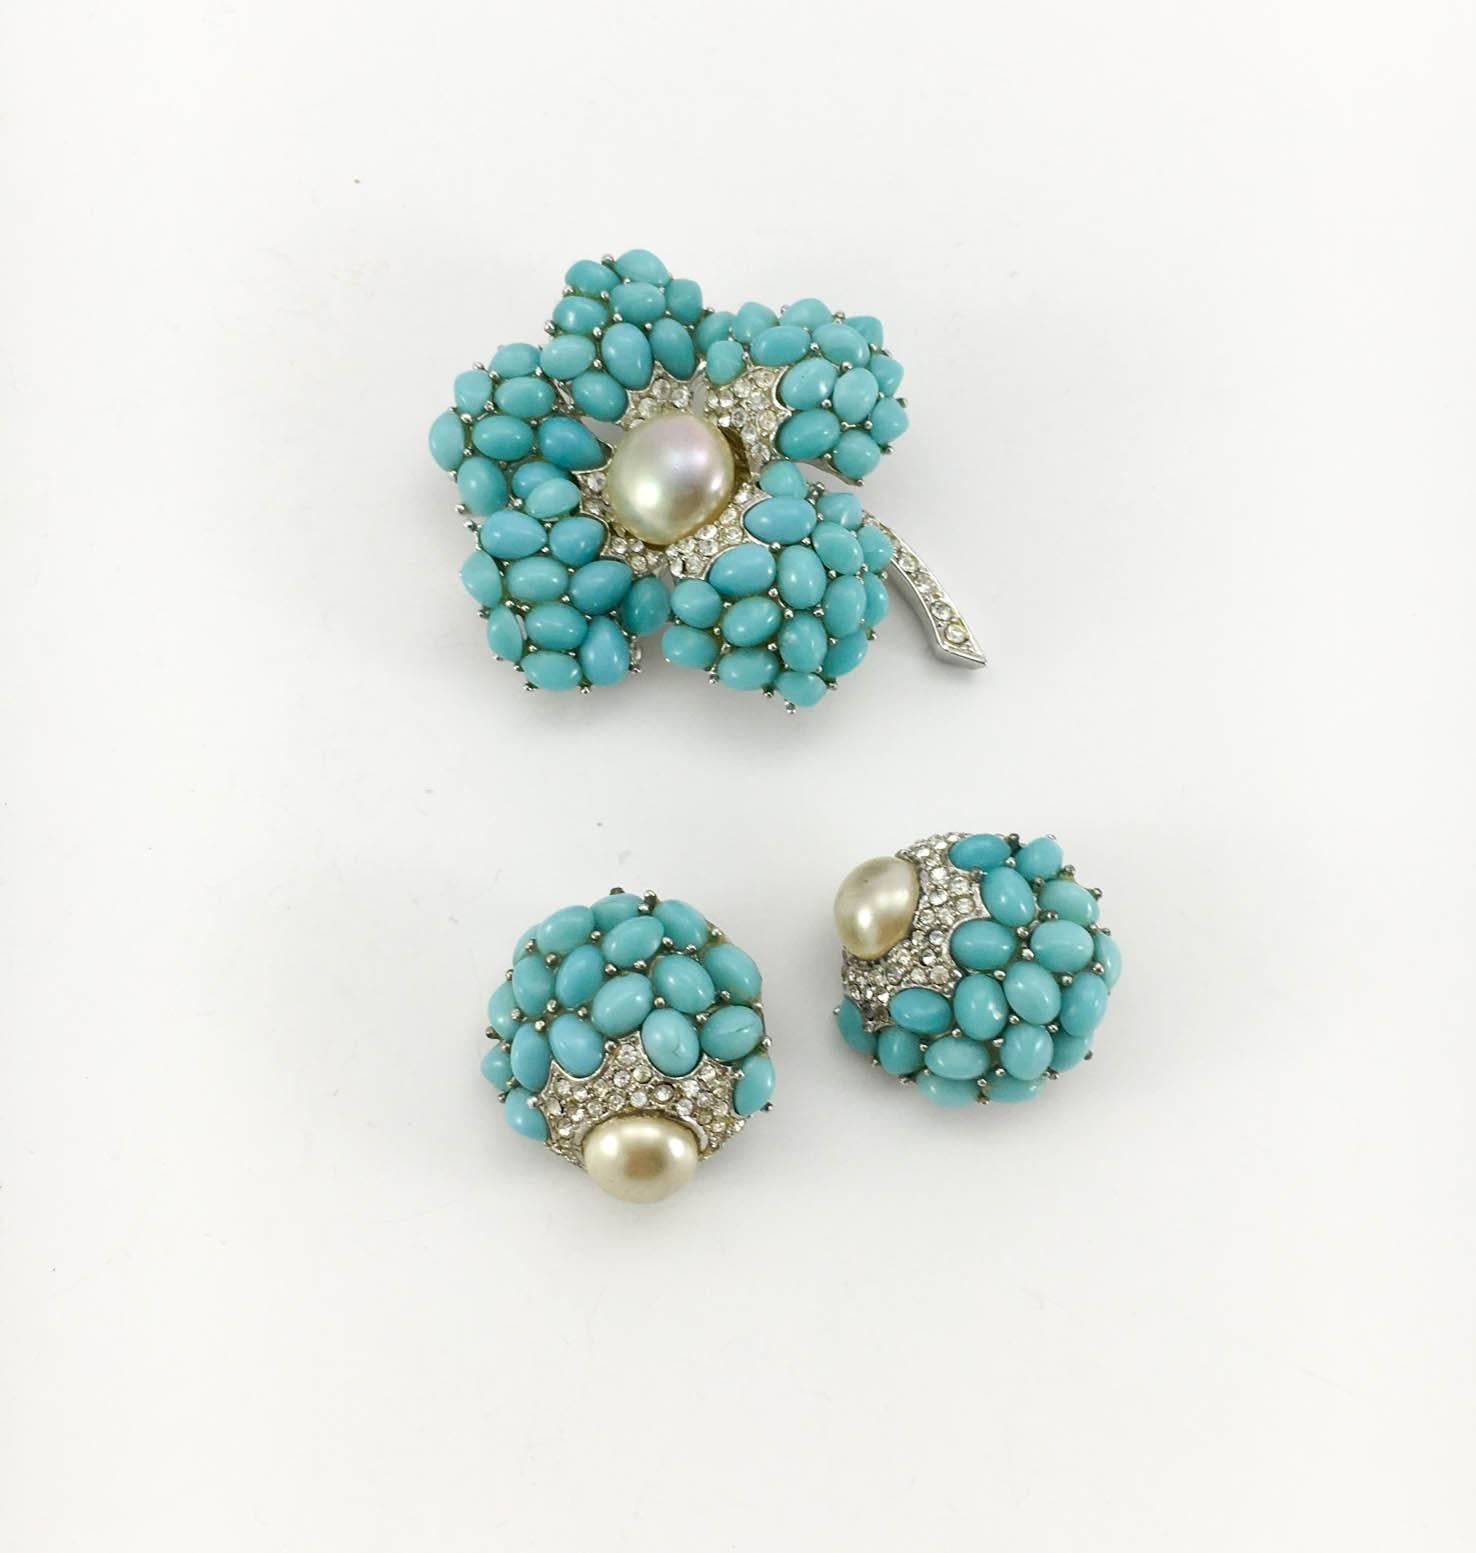 Vintage Boucher Earrings and Brooch Set. This beautiful set by Boucher comprises of a flower brooch and a pair of earrings. The faux turquoise beads are combined with paste (rhinestones), glass pearls and white metal. Marcel Boucher was a jewellery